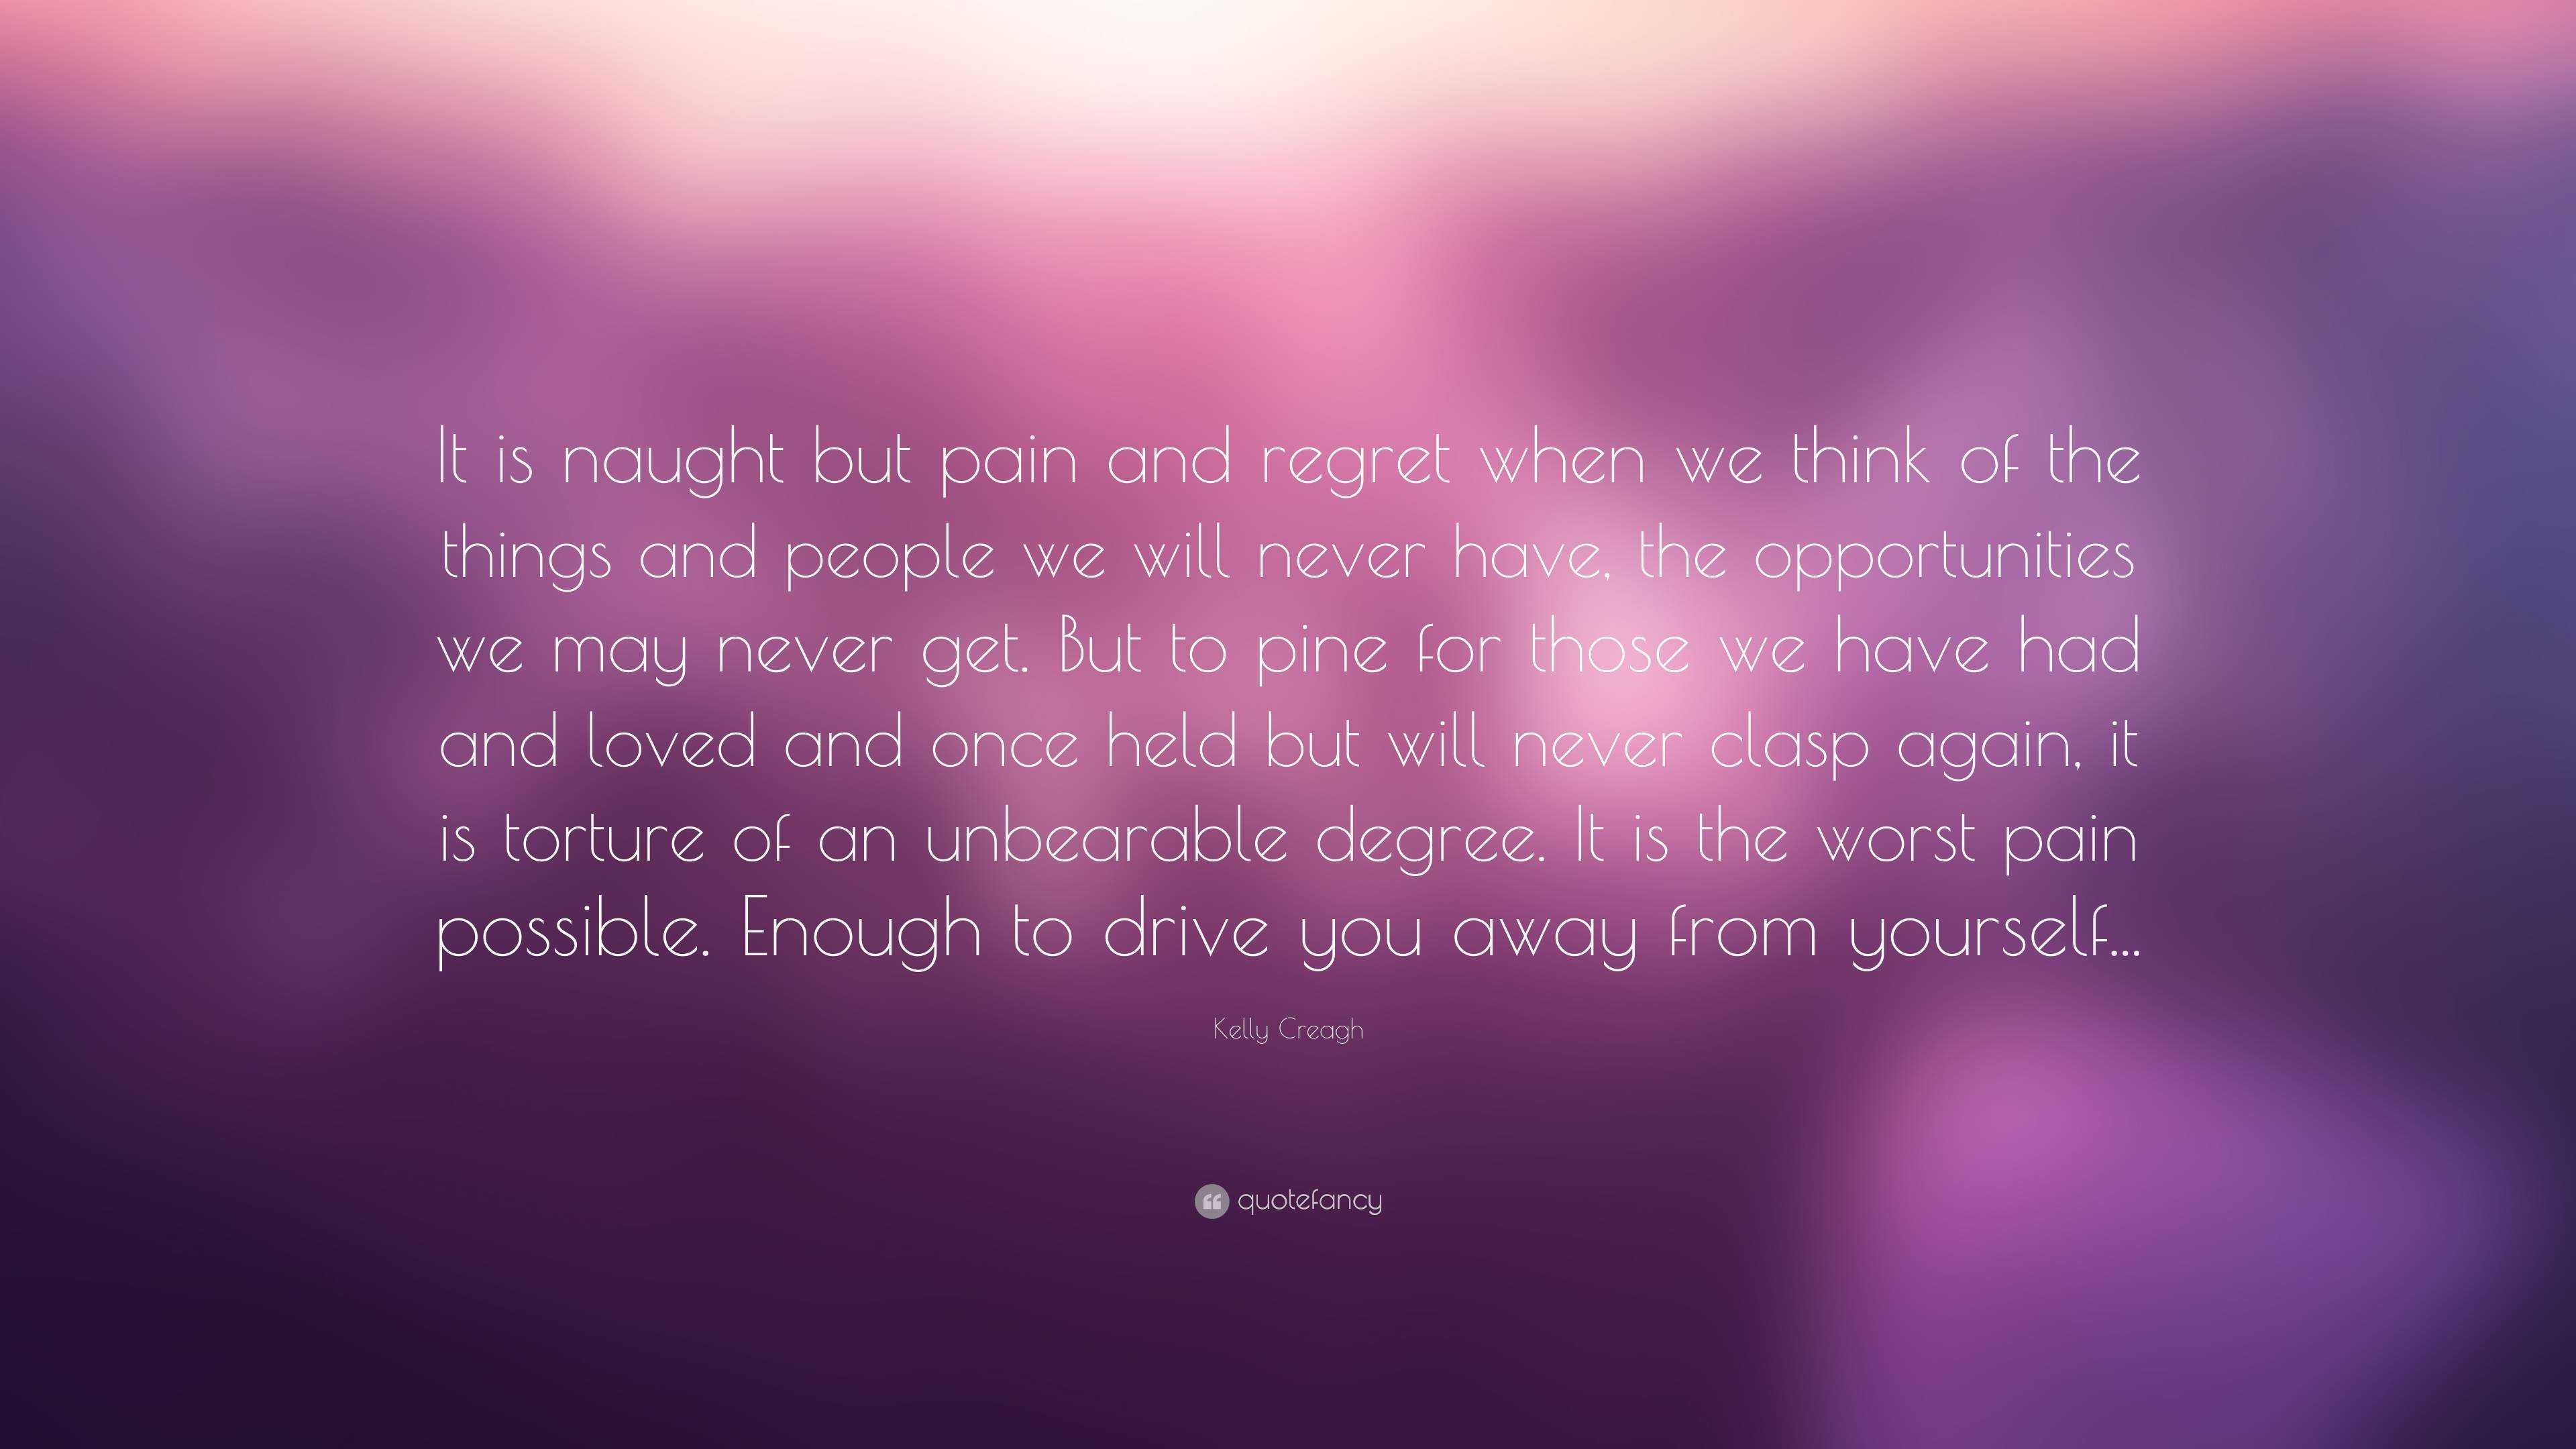 Kelly Creagh Quote: “It is naught but pain and regret when we think of ...